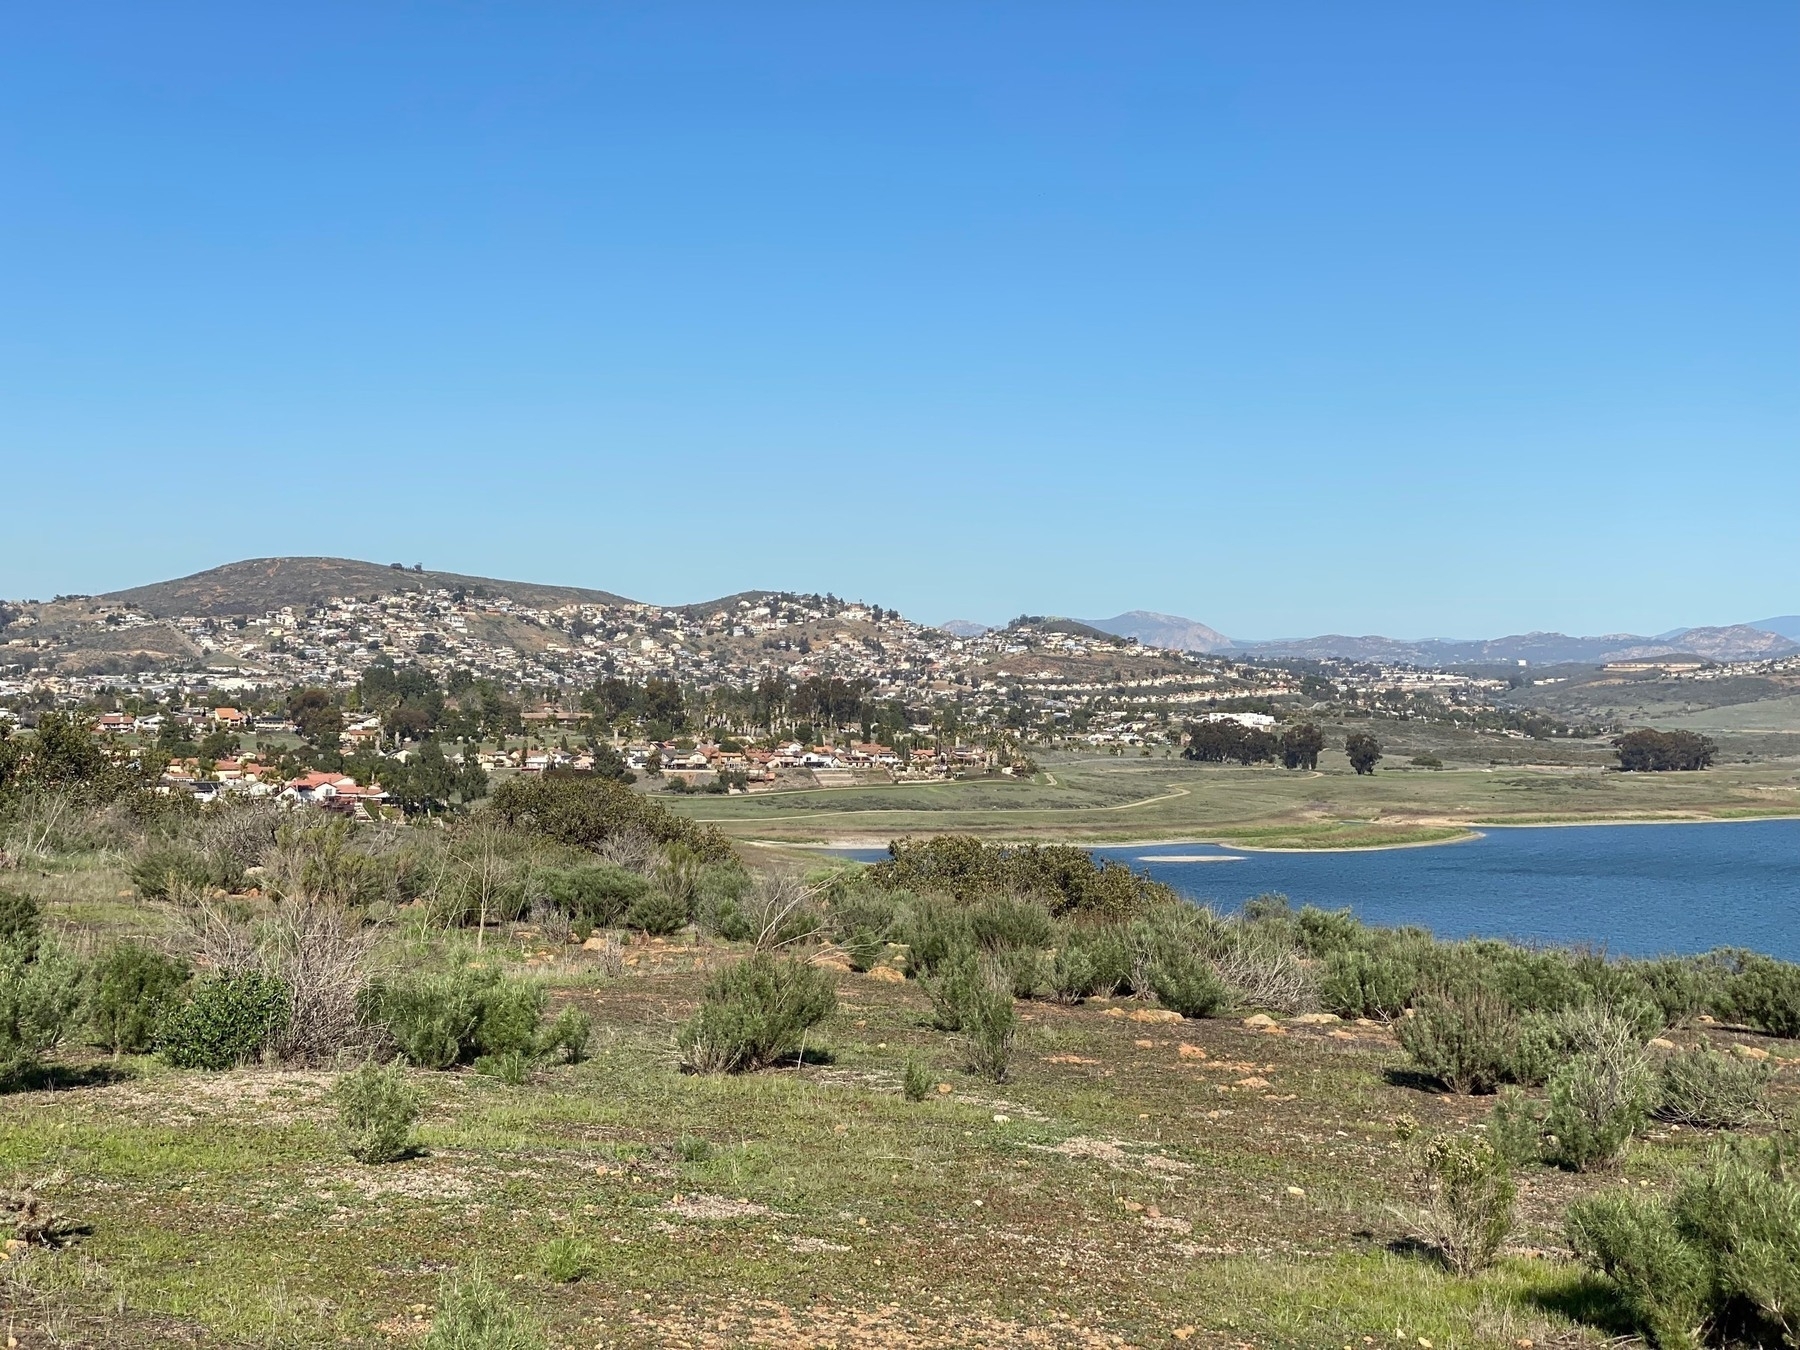 View of a reservoir surrounded by scrub brush, with houses dotting the hills on the far side.